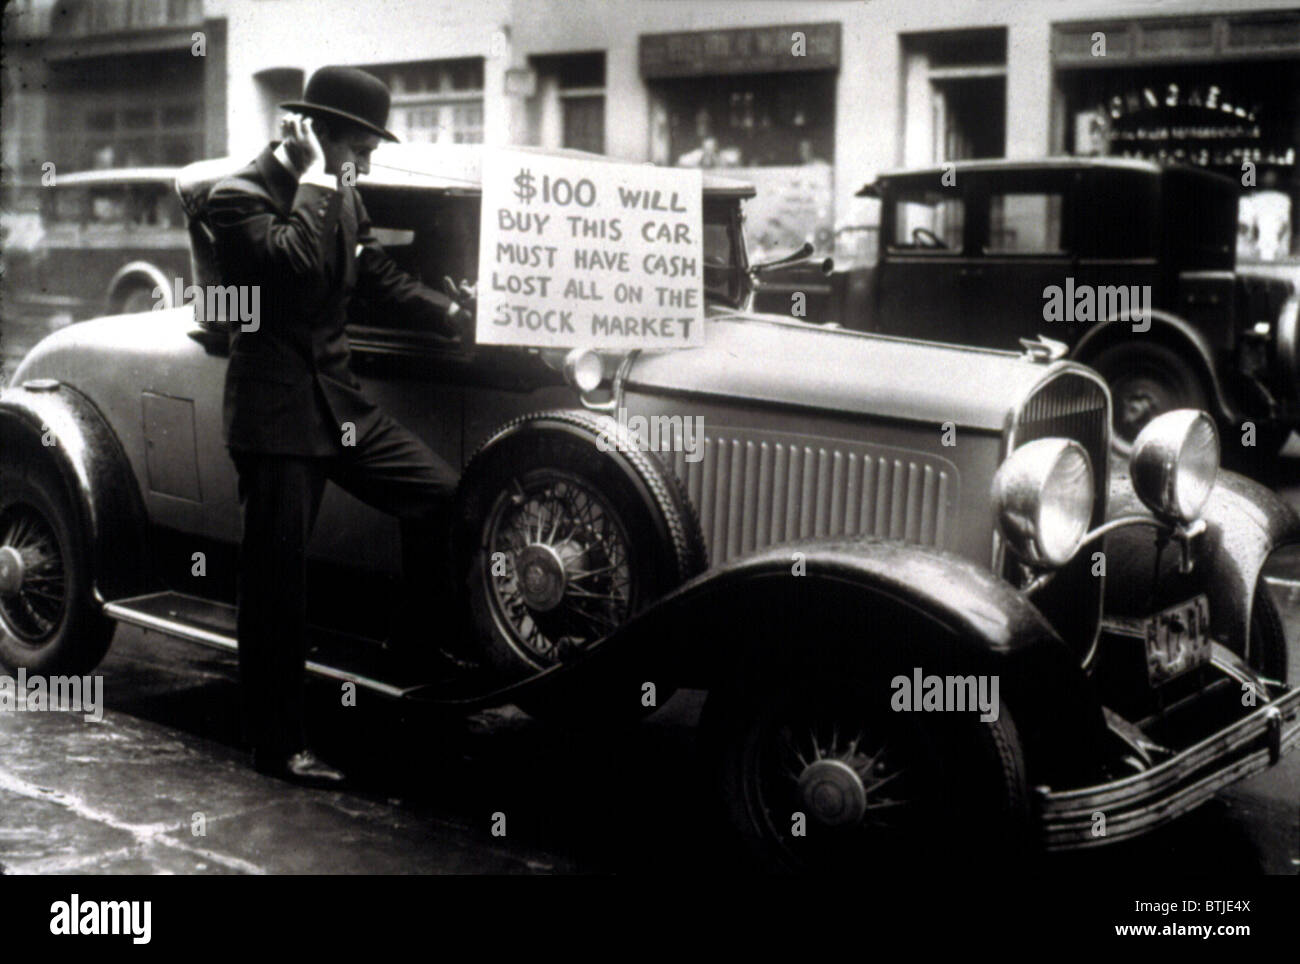 Man trying to sell his expensive car for $100 after being wiped out in the Stock Market Crash, 1929. Stock Photo